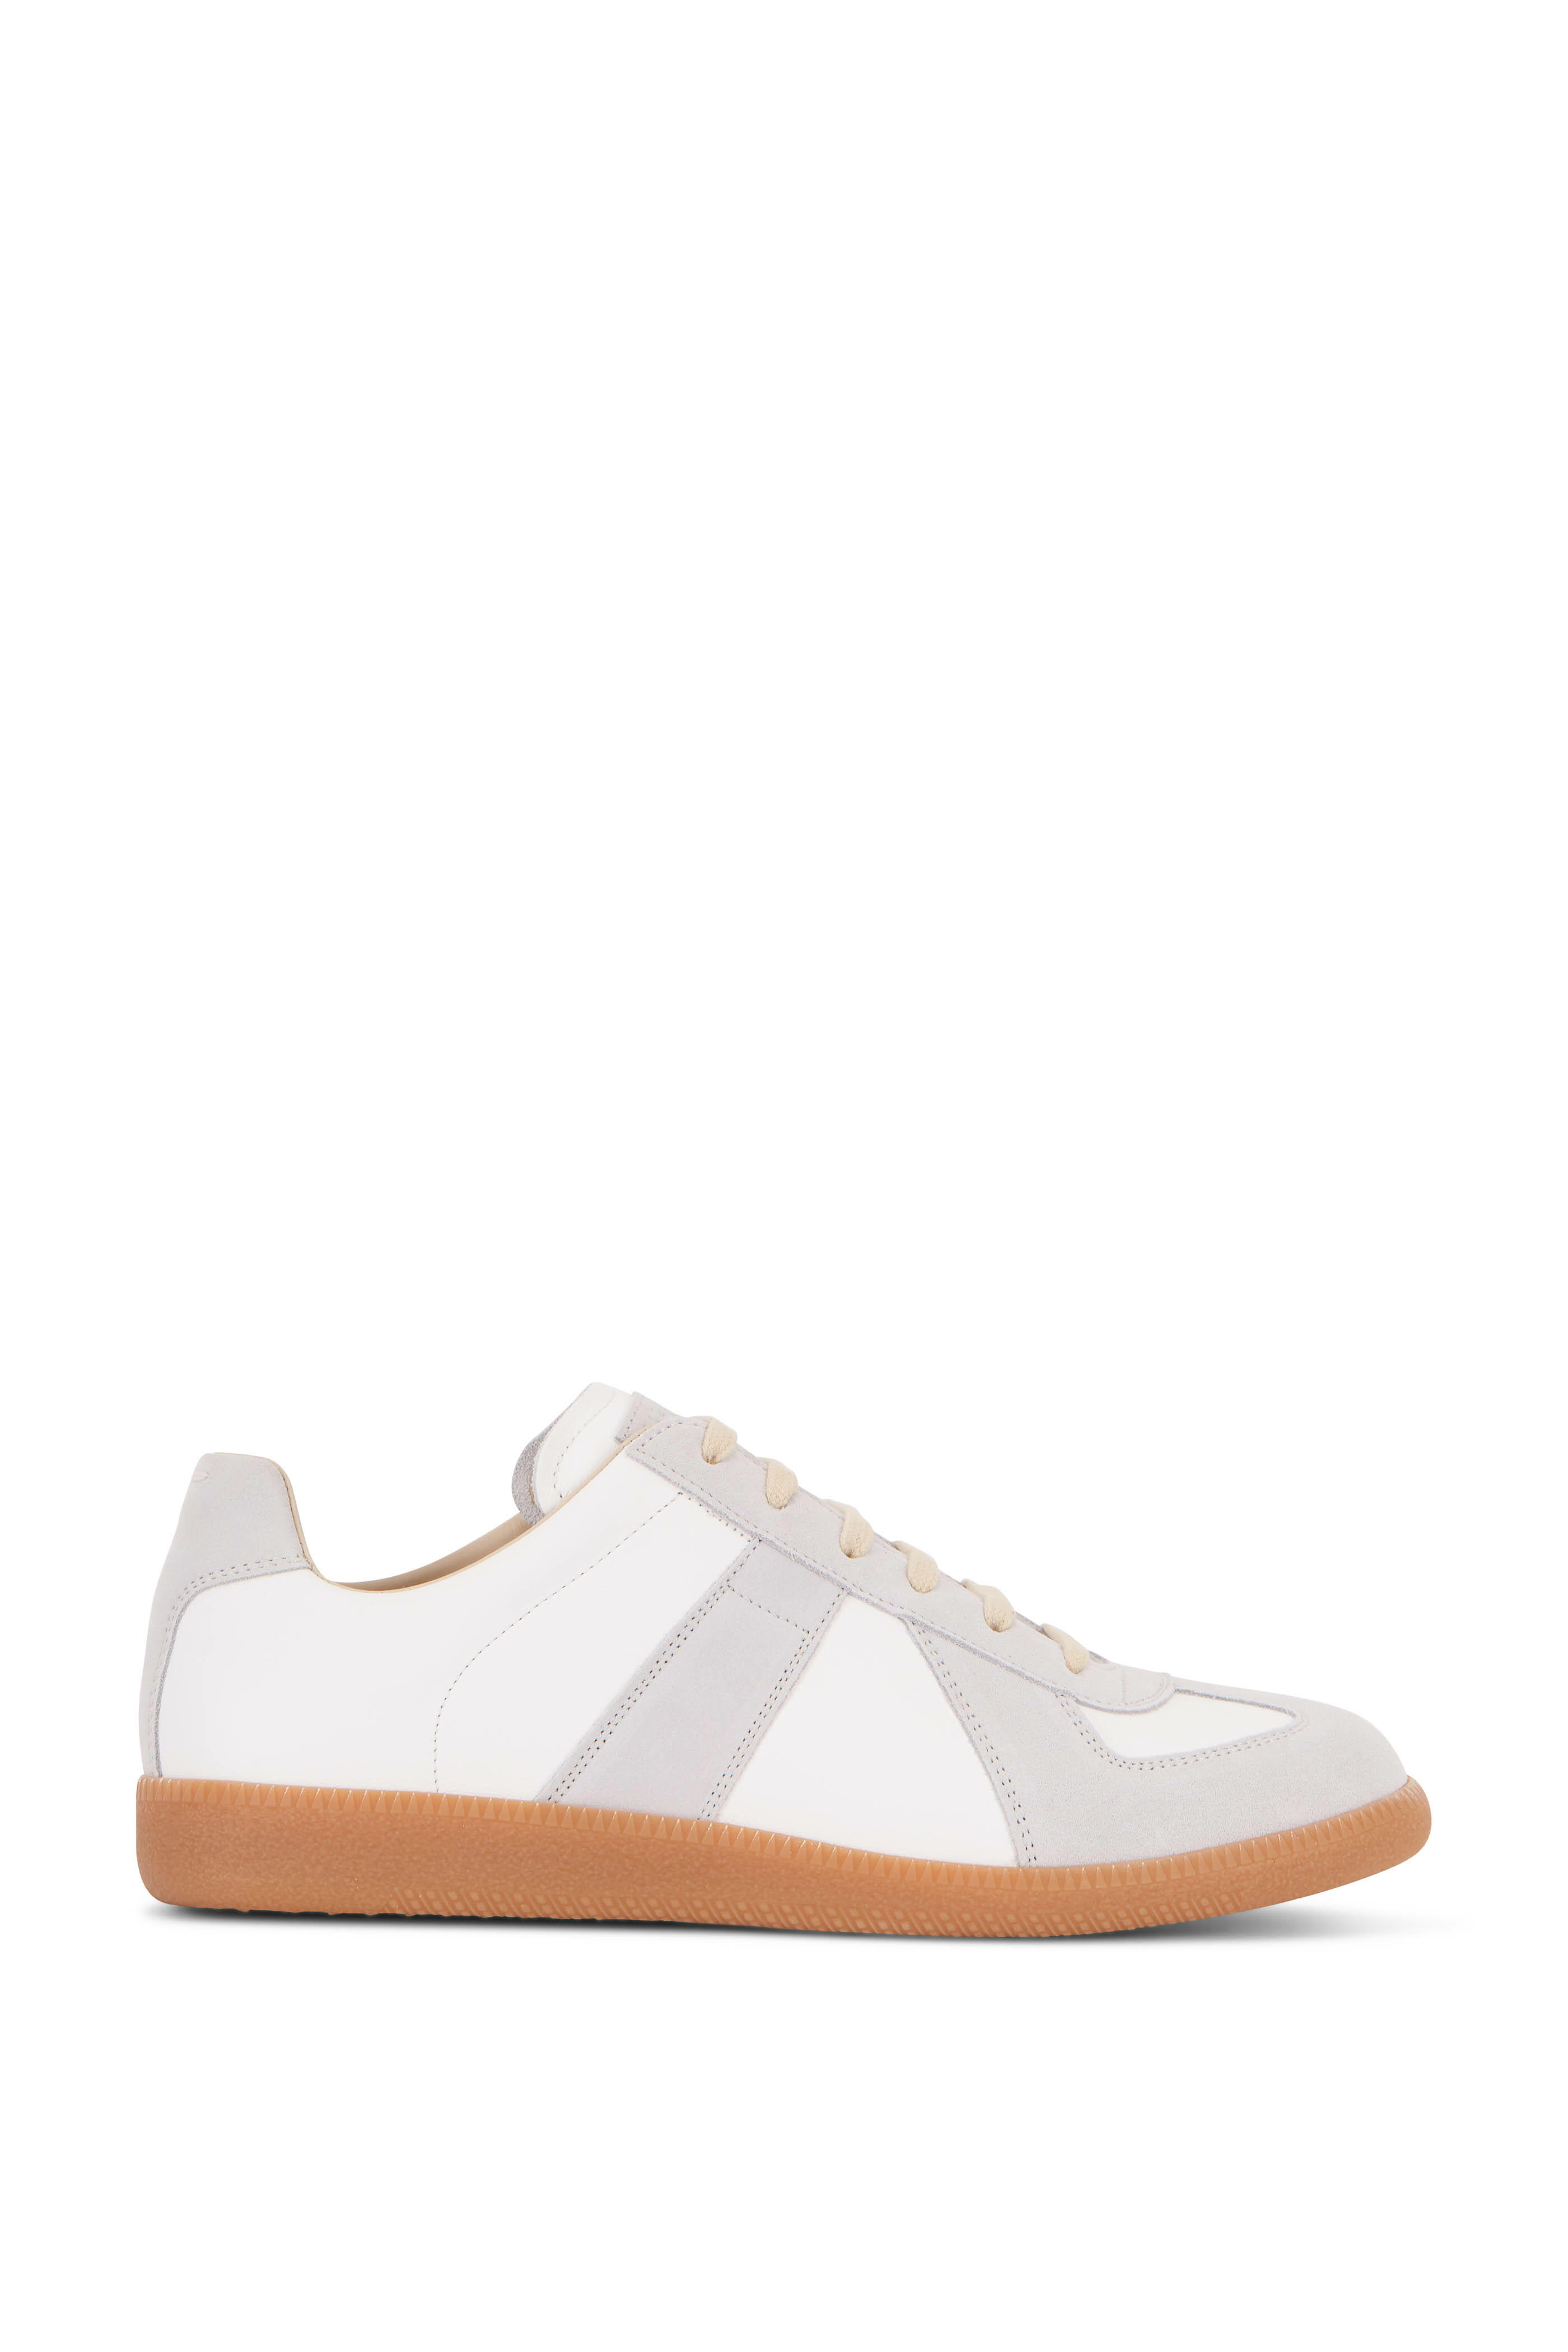 lærred Clip sommerfugl broderi Maison Margiela - Replica Off White Leather & Suede Lace-Up Sneaker